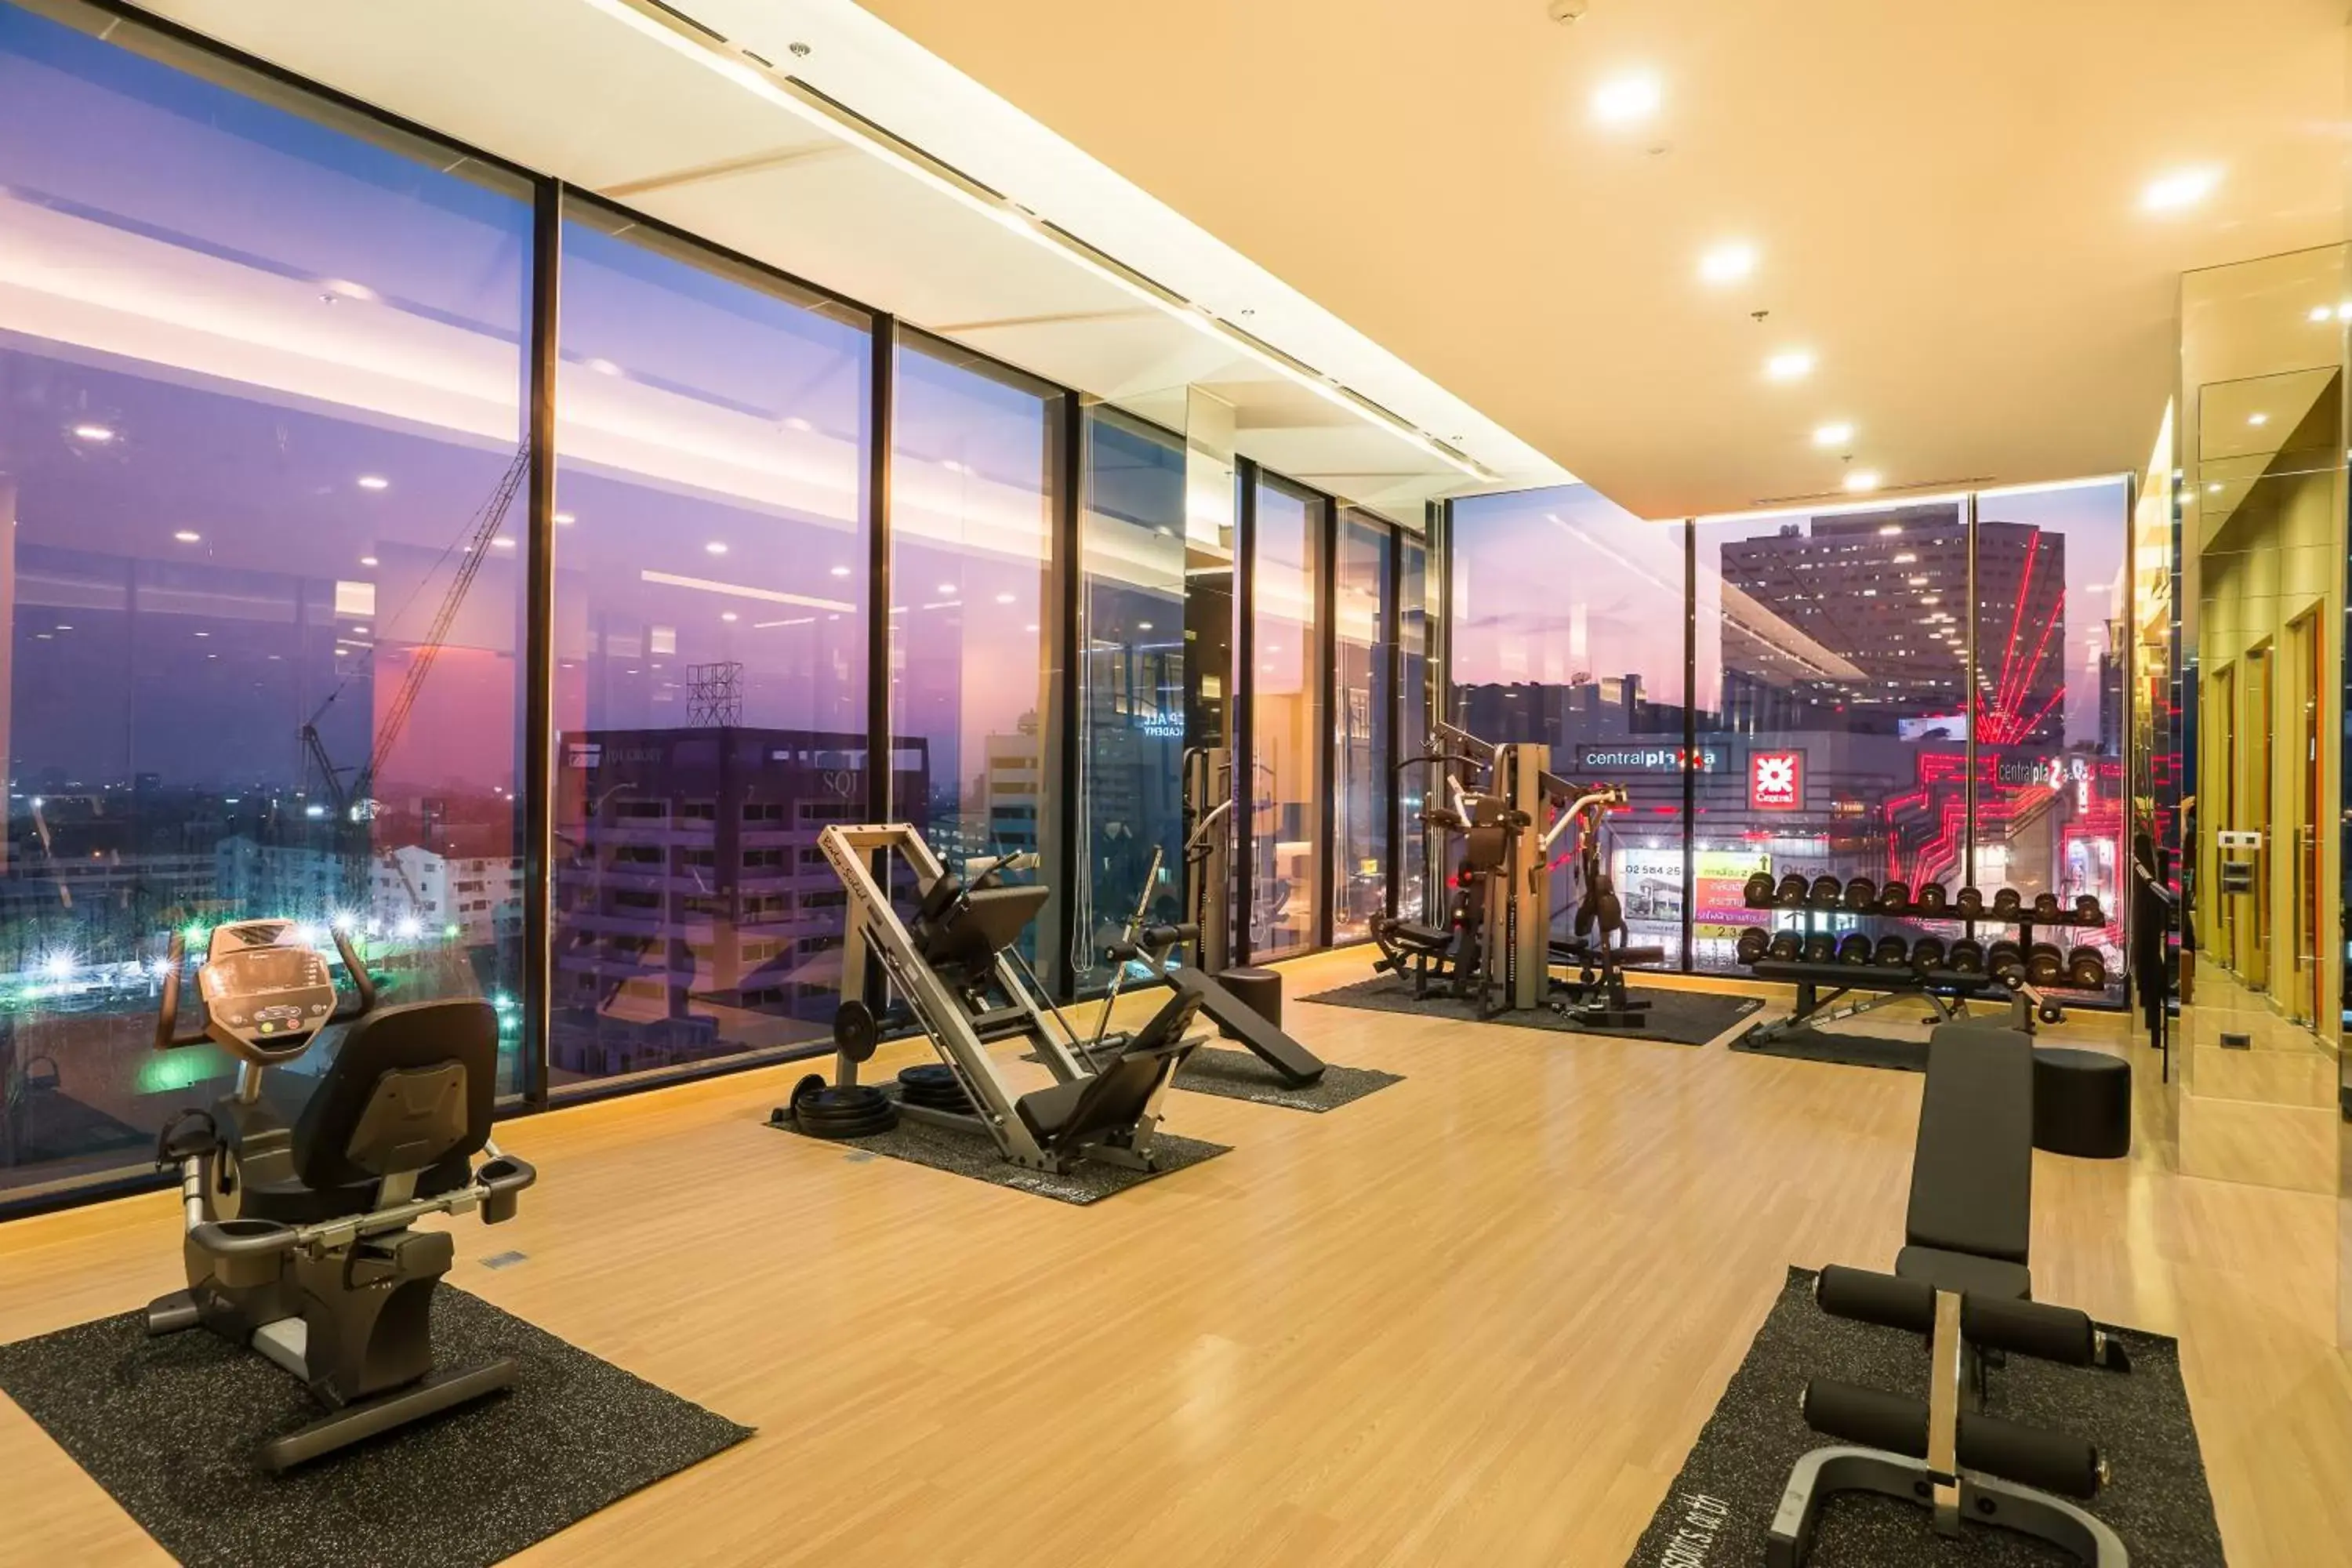 Fitness centre/facilities, Fitness Center/Facilities in Best Western Plus Wanda Grand Hotel